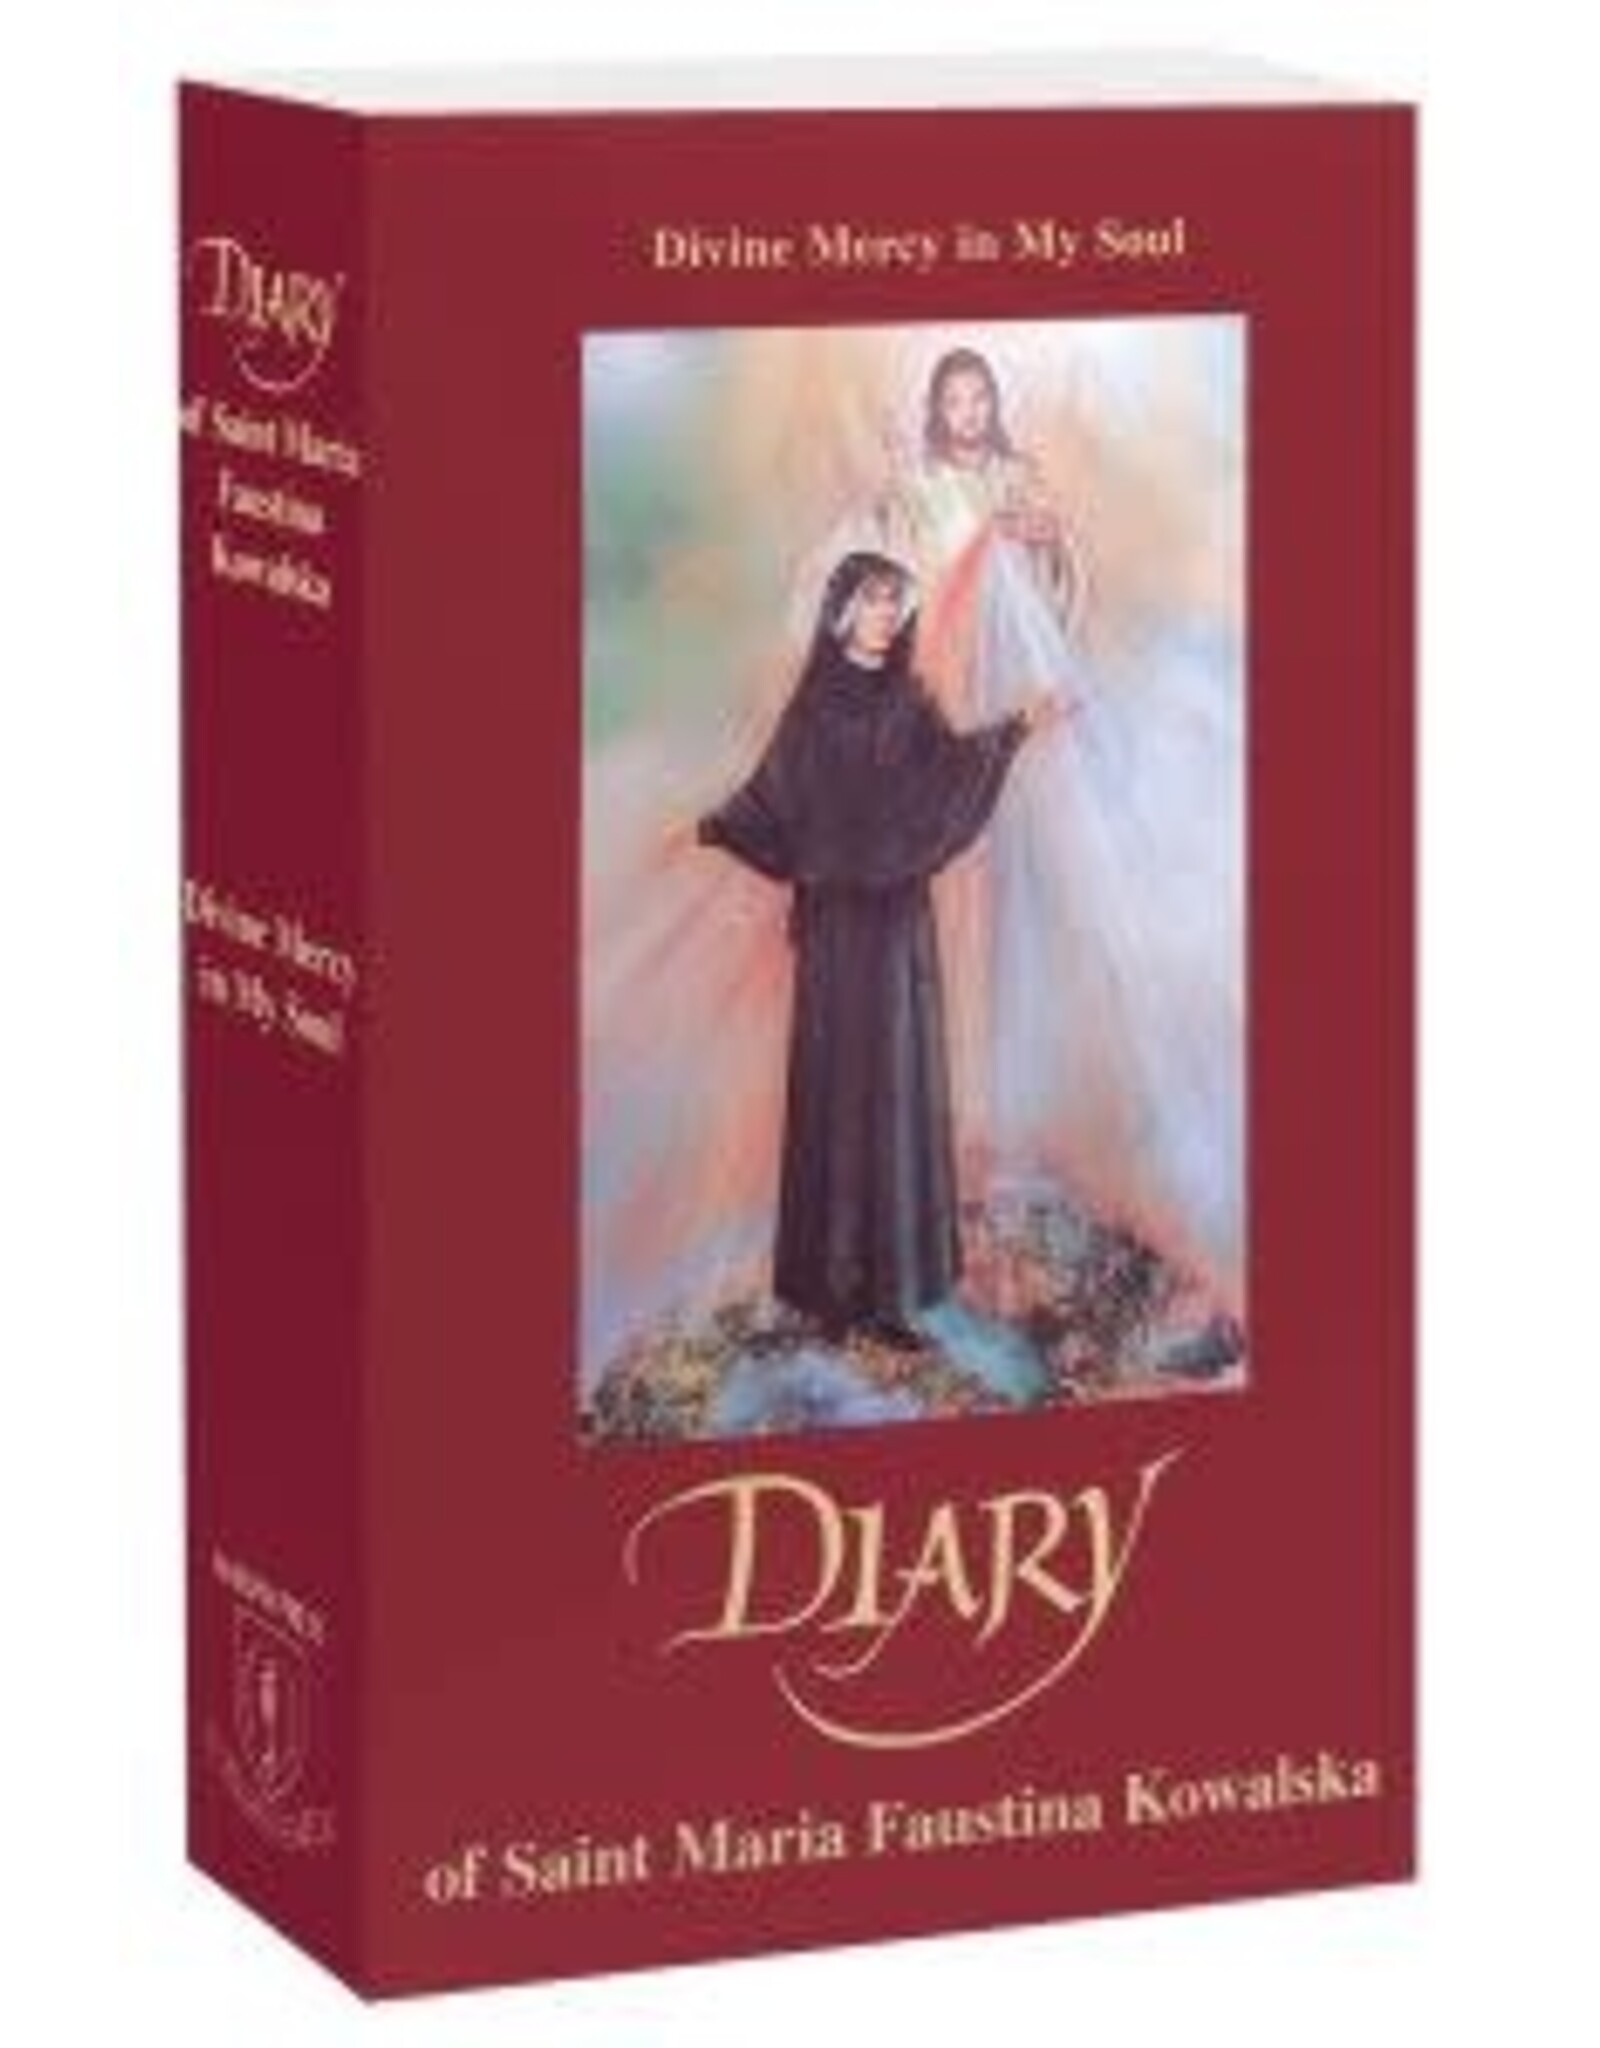 Association of Marian Helpers Compact Edition: Divine Mercy in My Soul: Diary of Saint Maria Faustina Kowalska (Paperback)